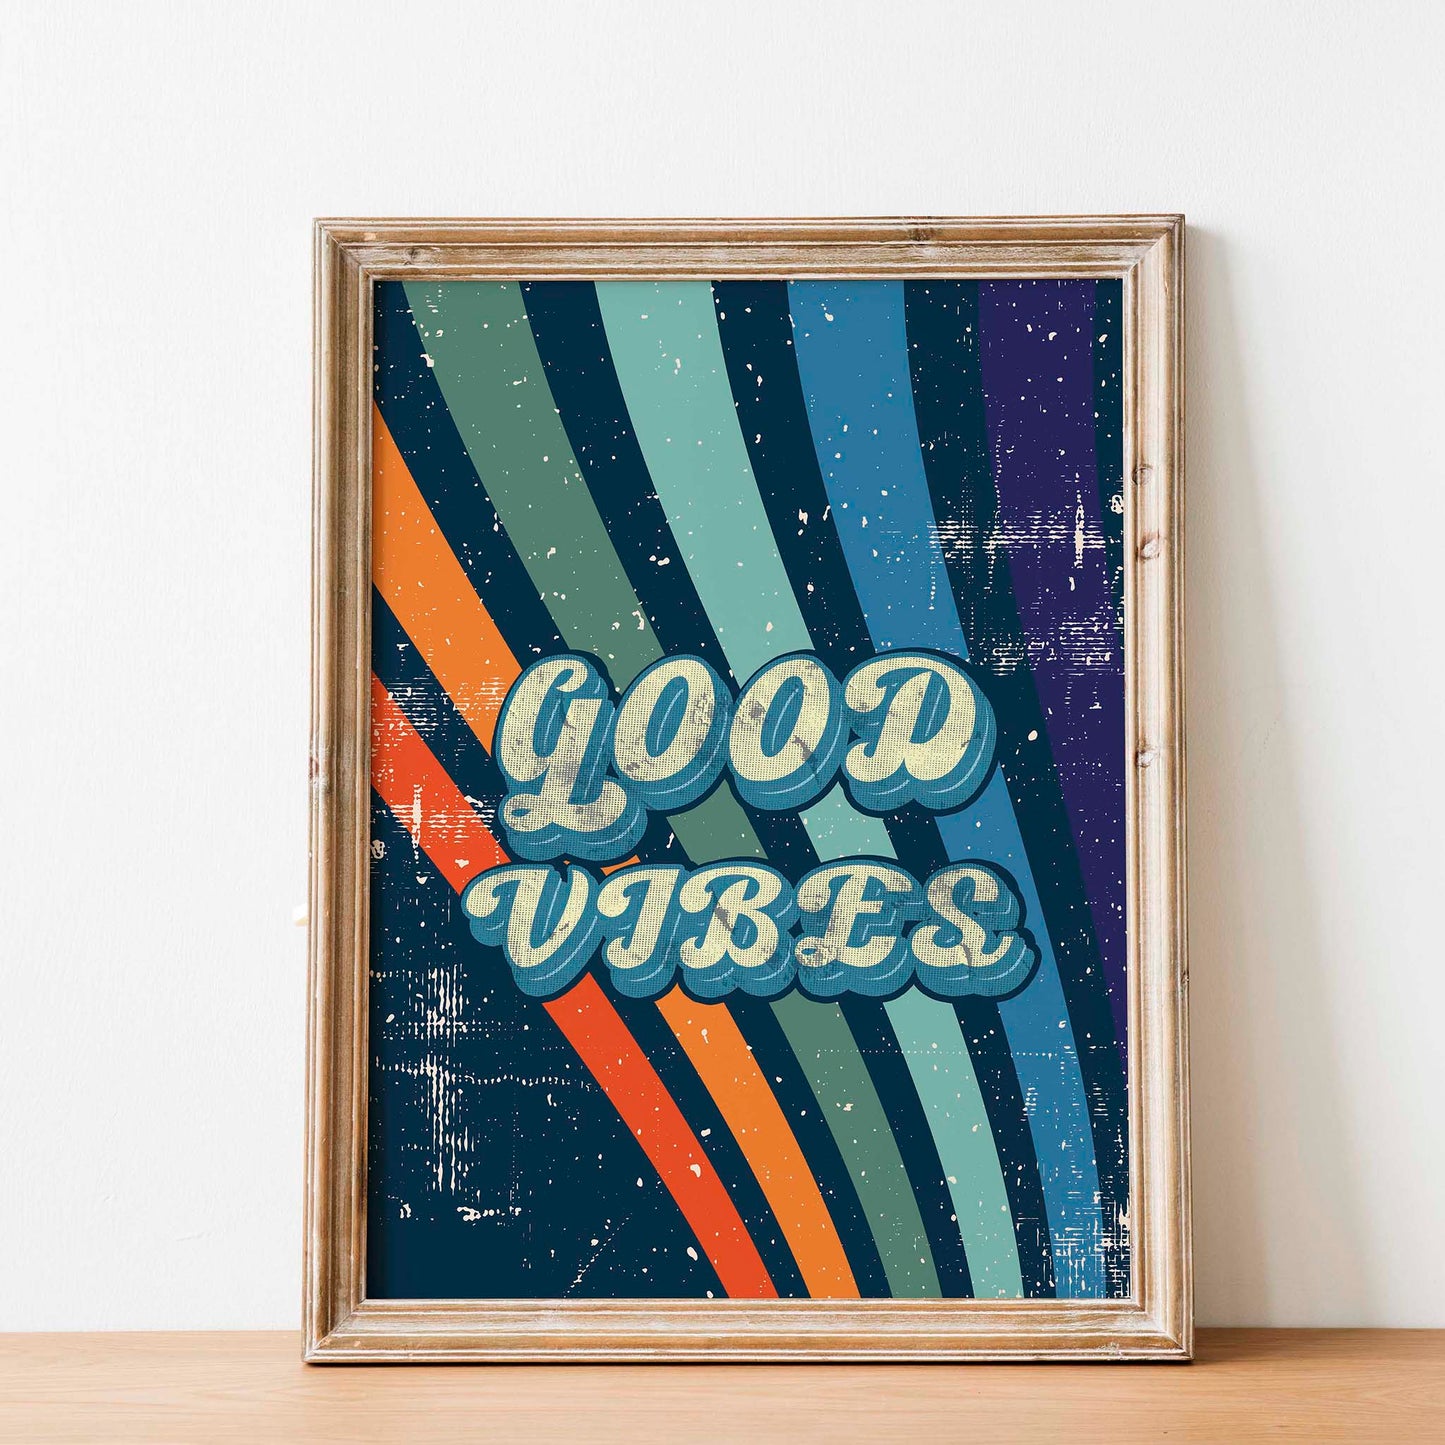 Good Vibes Retro Poster - SweetPixelCreations